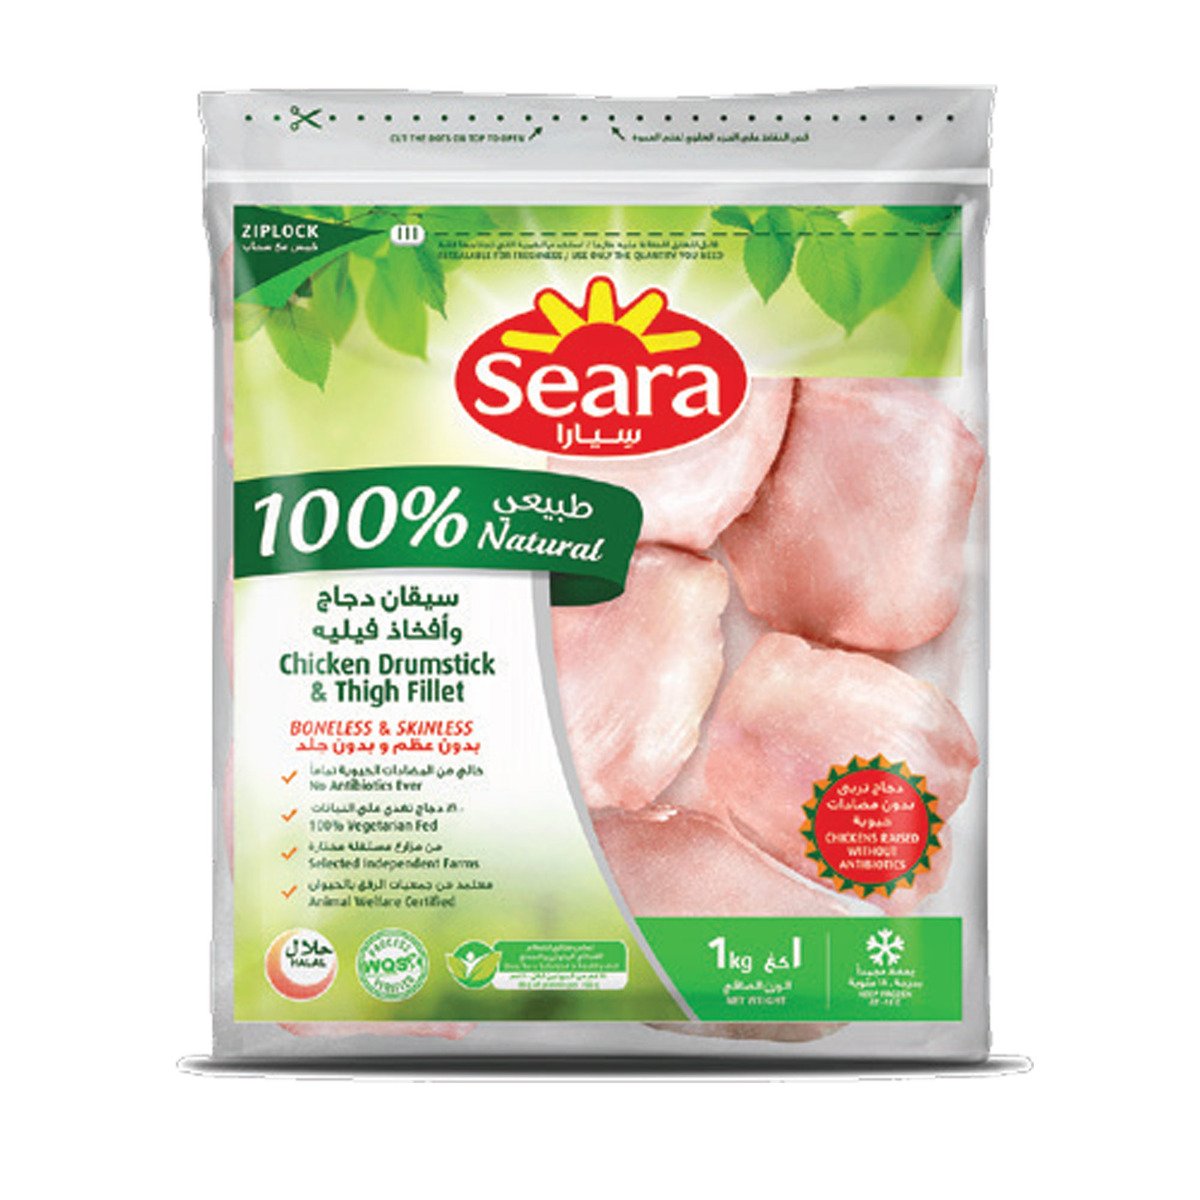 Seara Chicken Drumstick And Thigh Fillet 1 kg